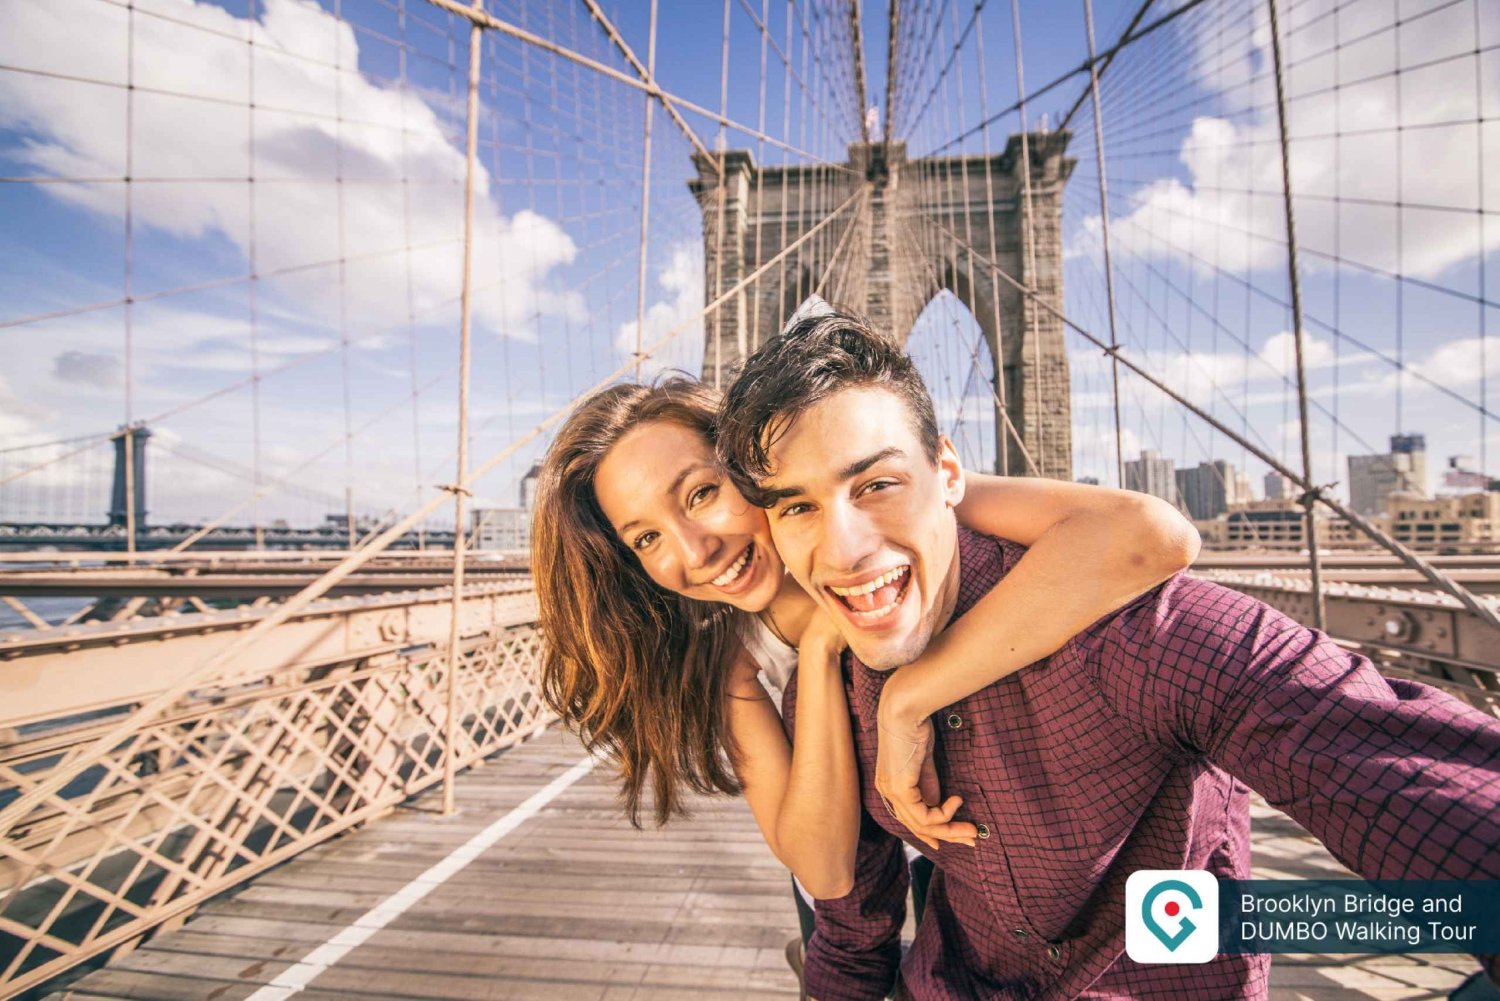 New York: 1-10 Day New York Pass for 100+ Attractions